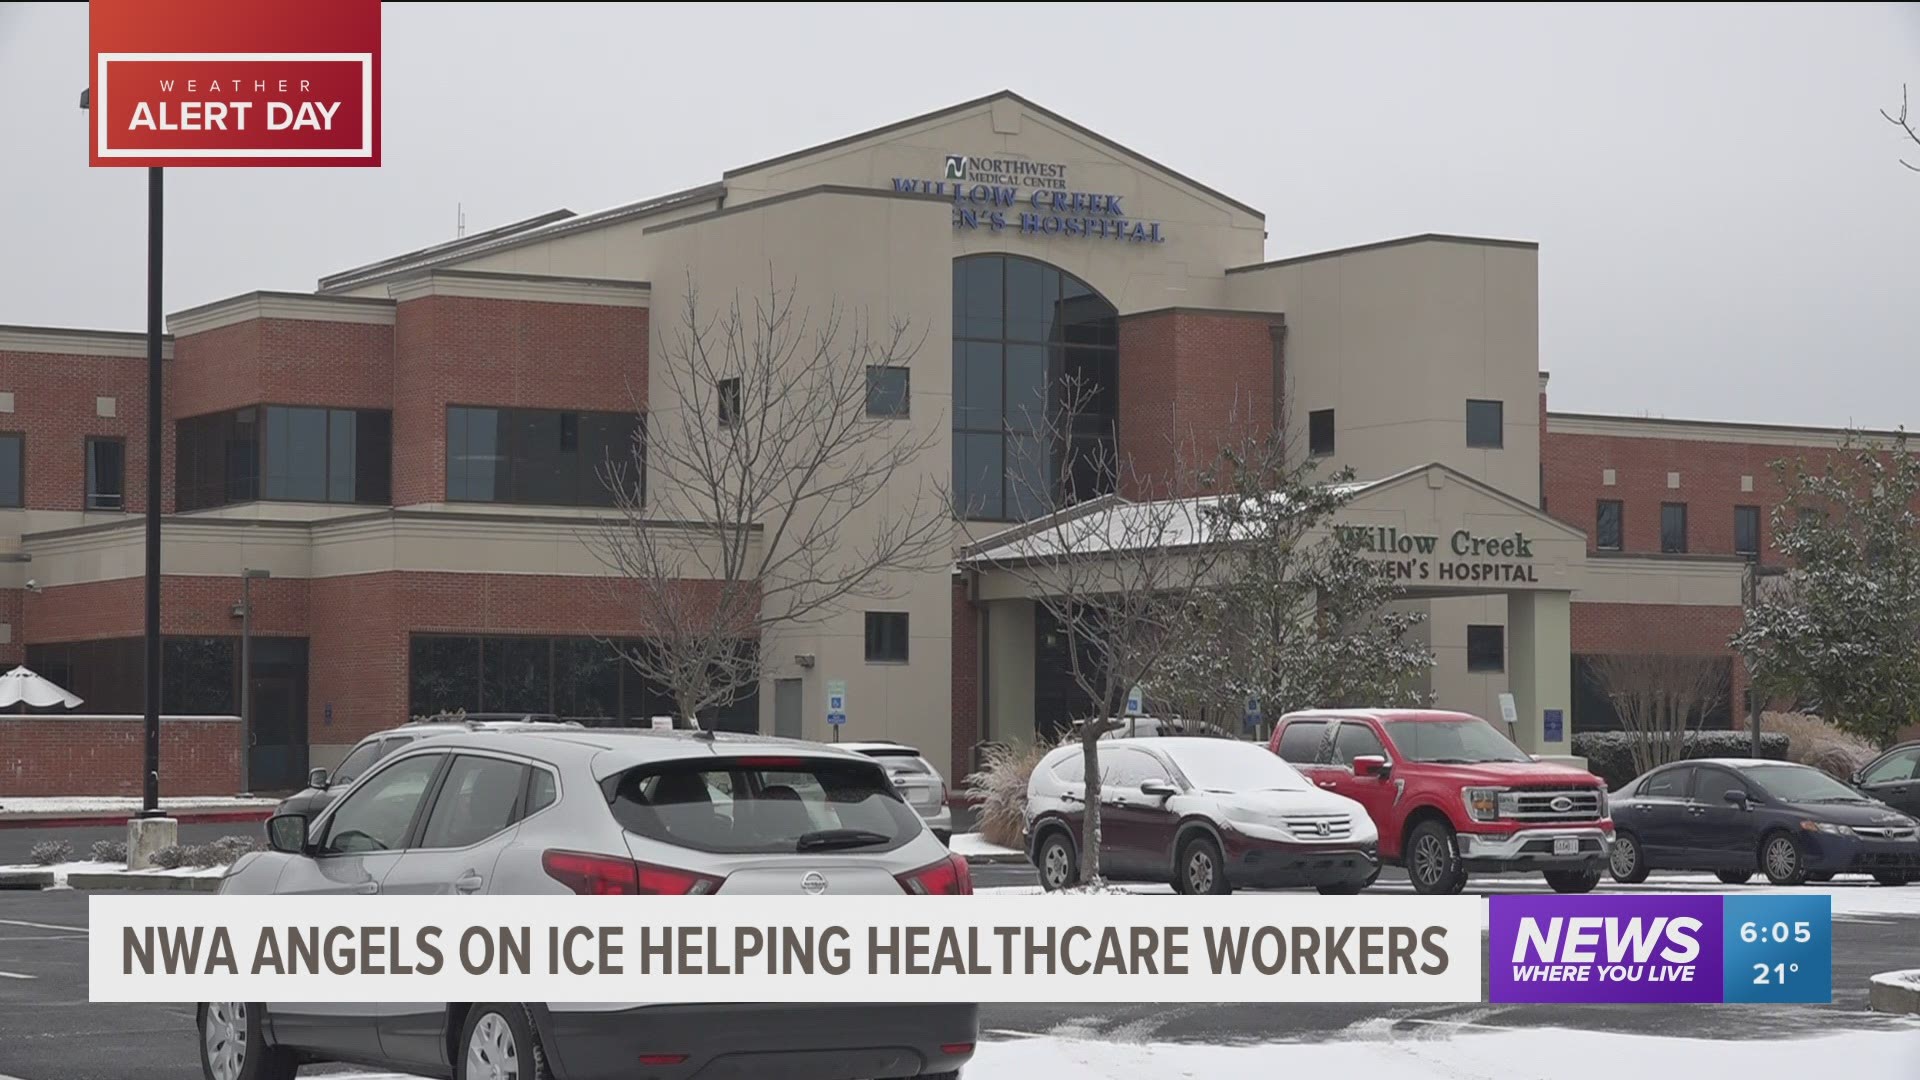 NWA Angels on Ice has been giving rides to dozens of healthcare workers this week while the roads have been slick. https://bit.ly/3phtSHD